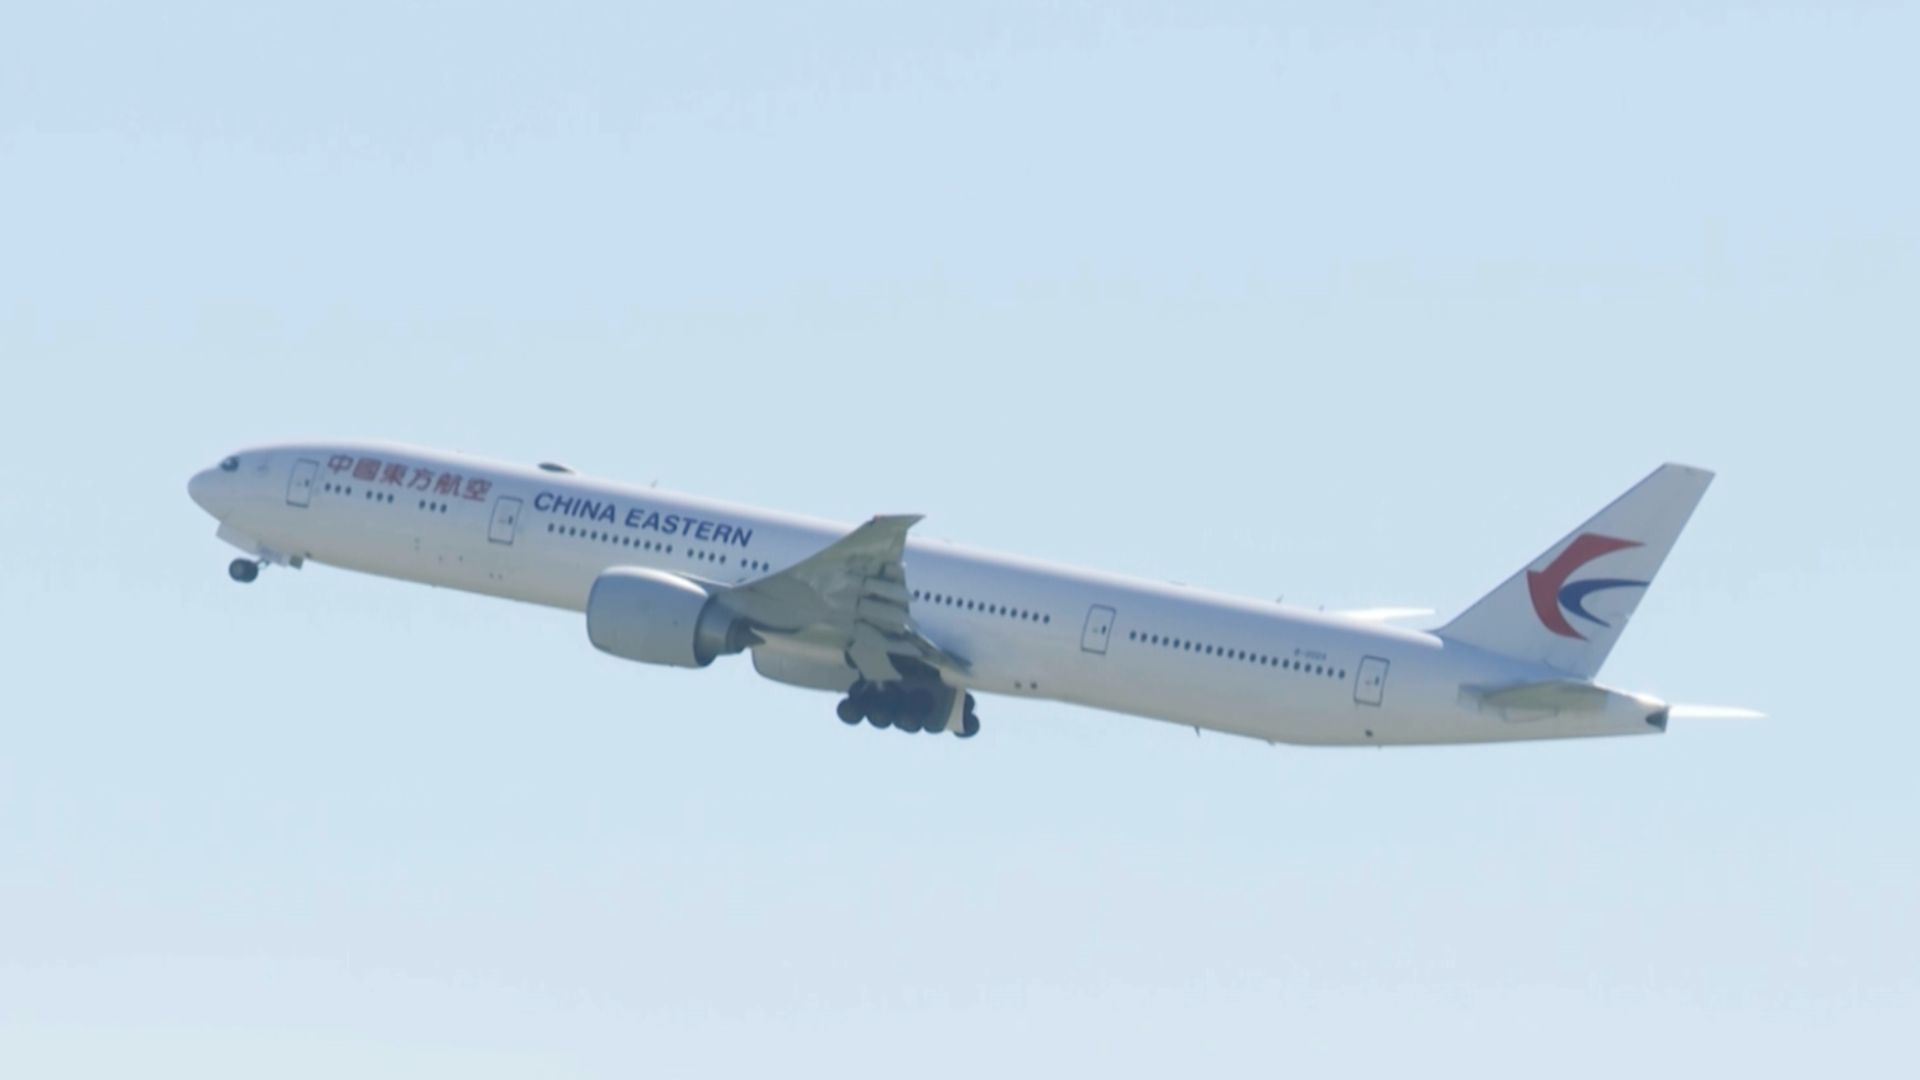 A China Eastern plane takes off from Gatwick. /CGTN